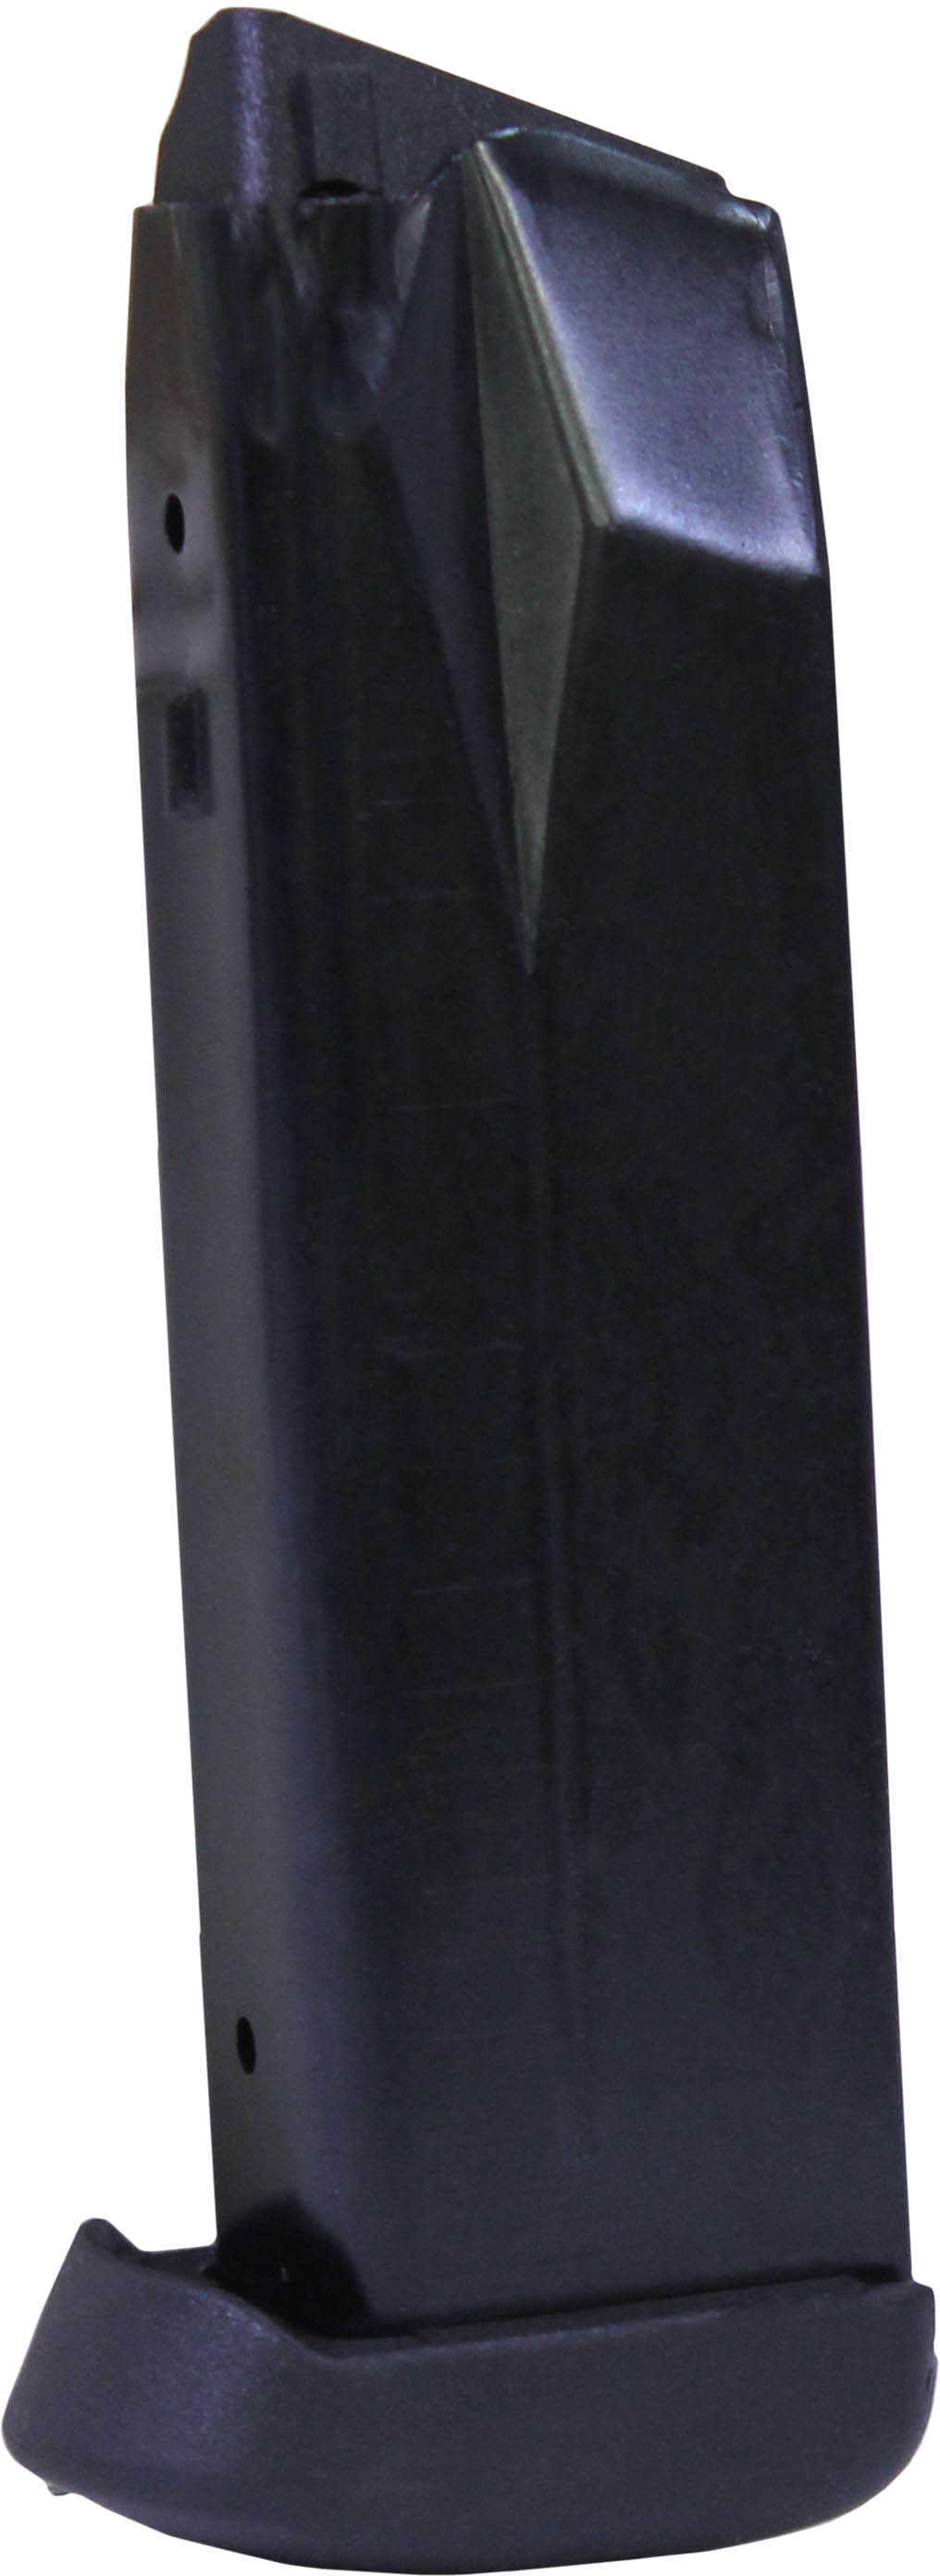 ProMag FN FNX-45 .45 ACP Magazine 15 Rounds Blued Steel FNH-A5